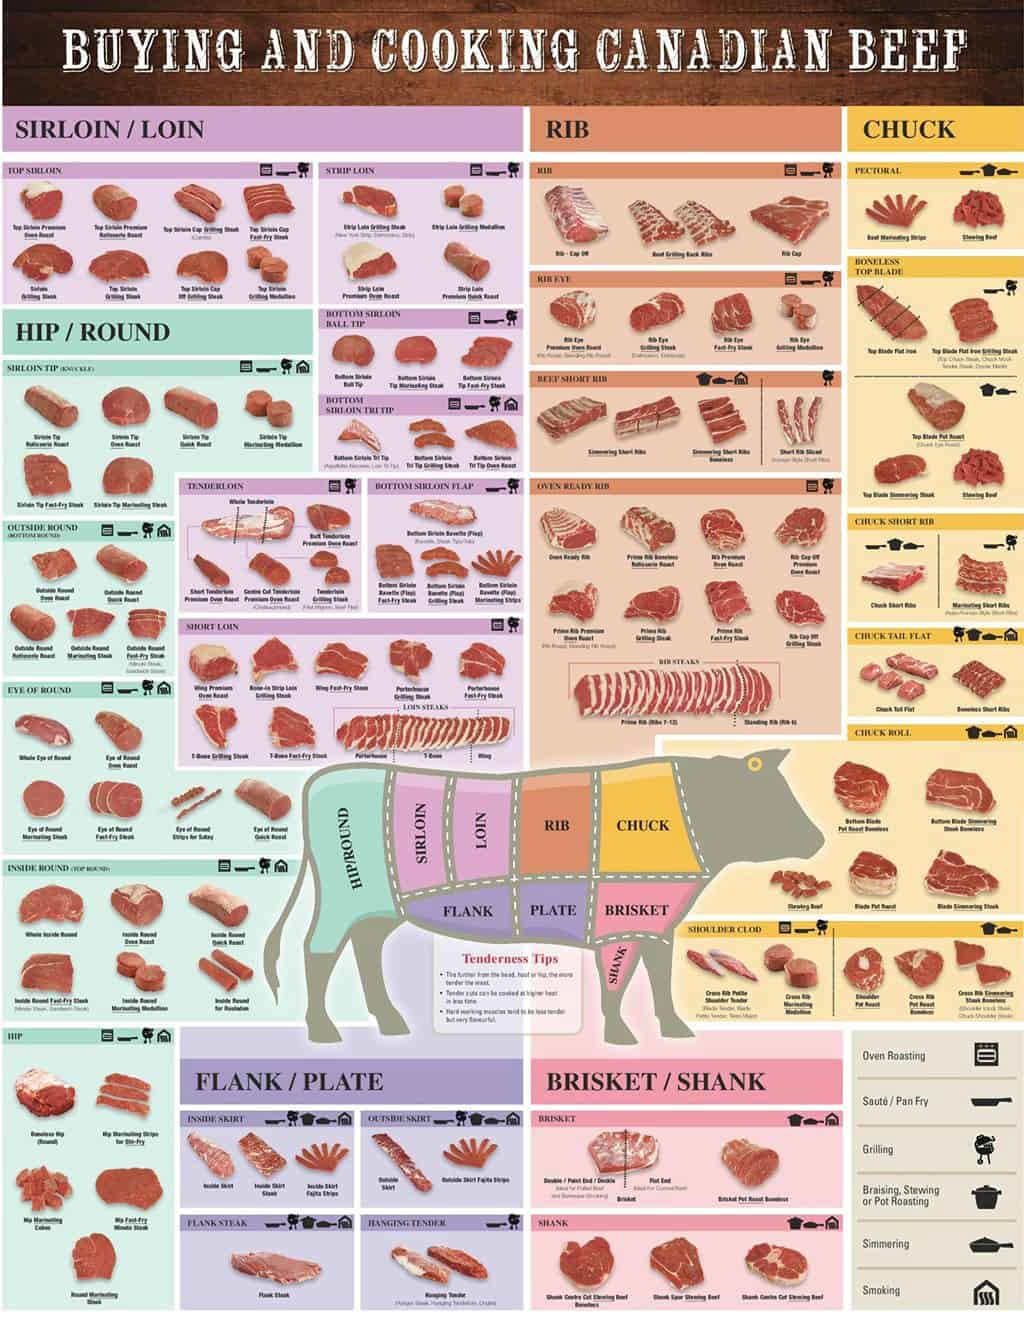 How to Know Your Cuts of Canadian Beef